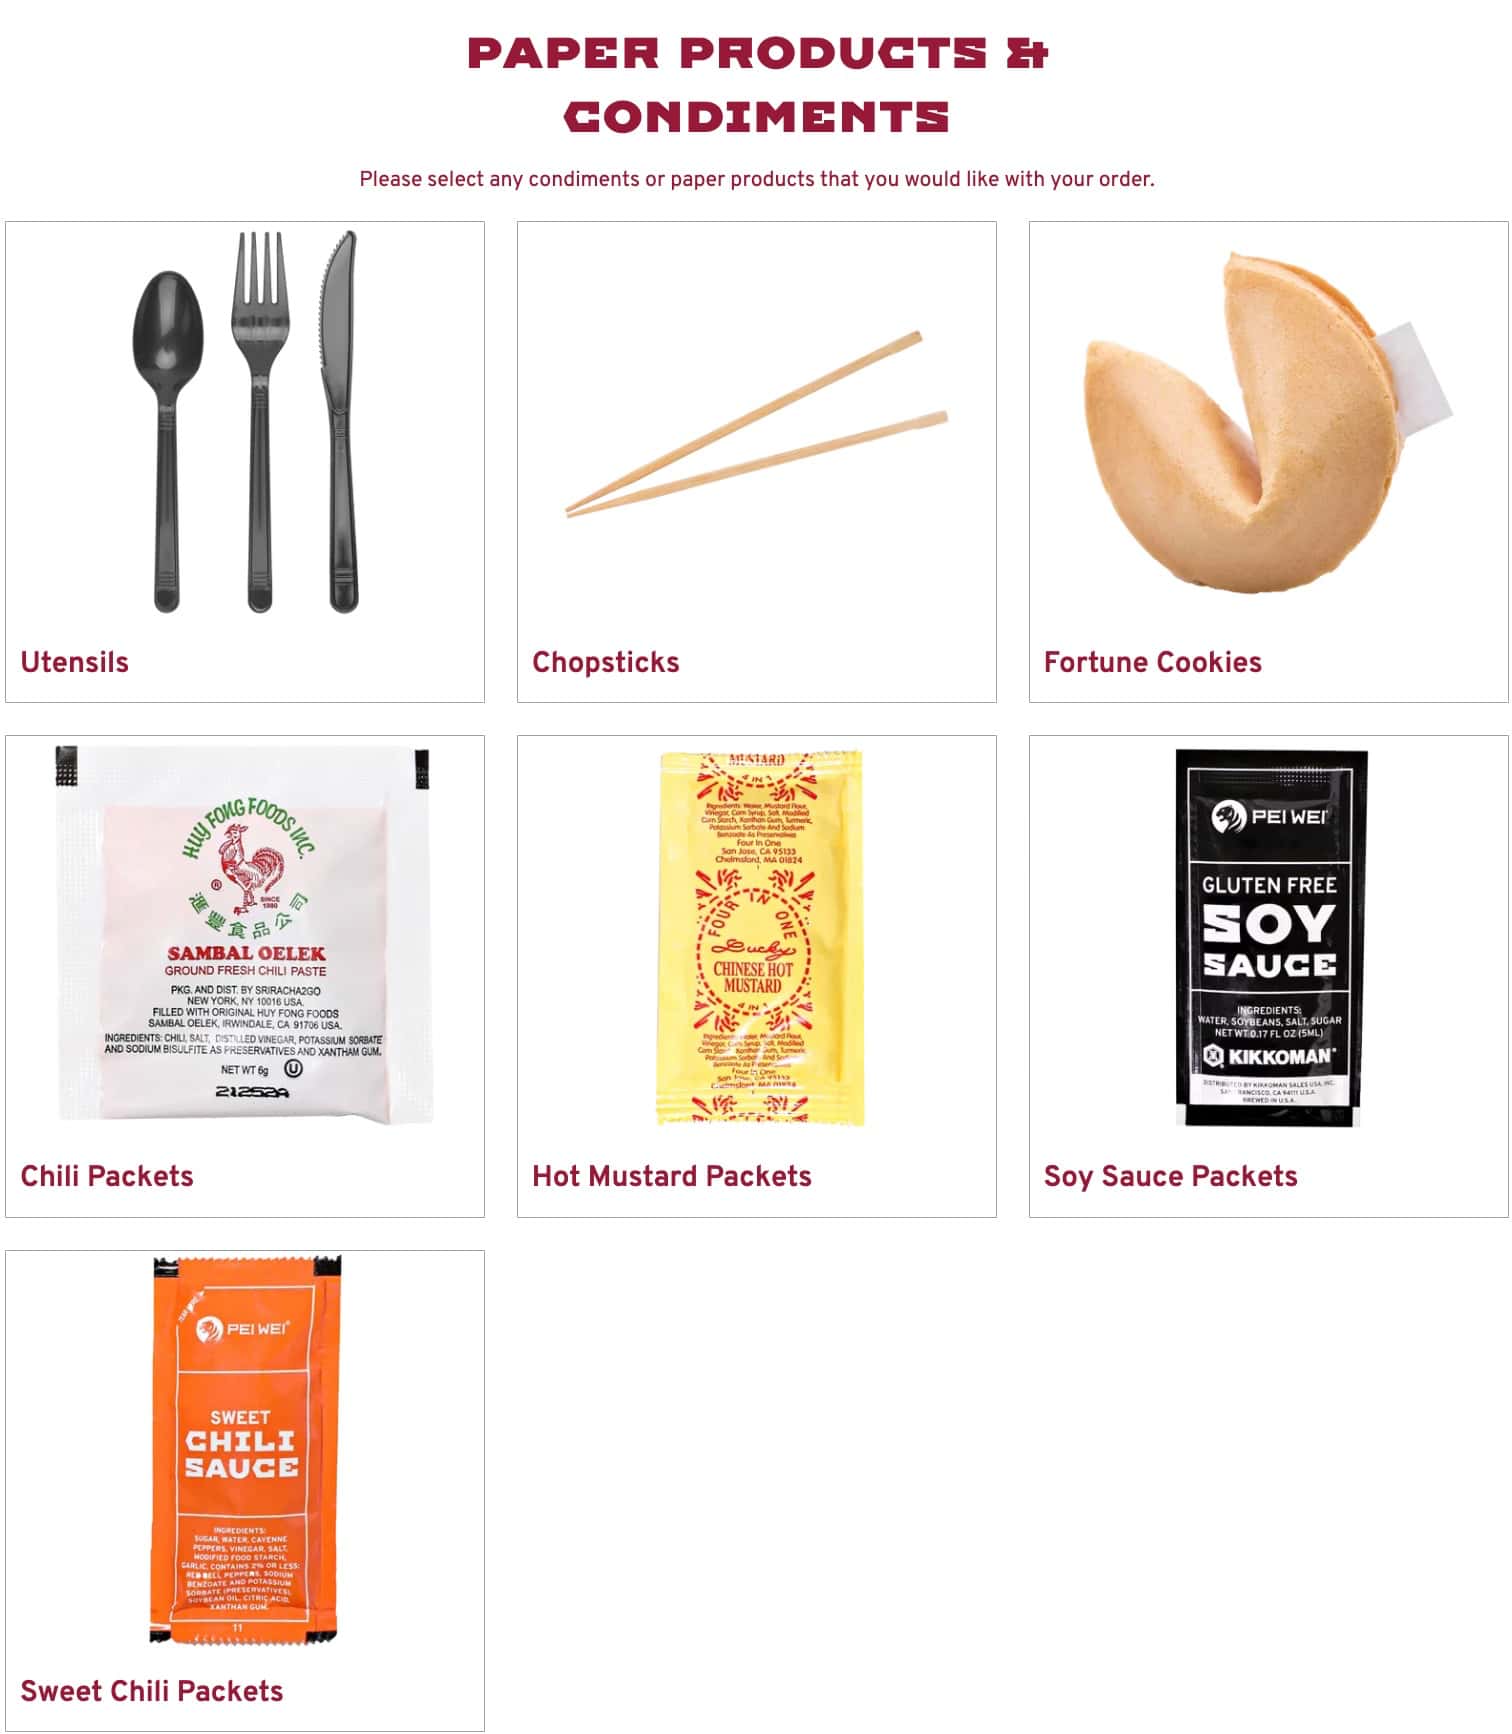 Pei Wei Asian Kitchen Paper Products and Condiments Menu